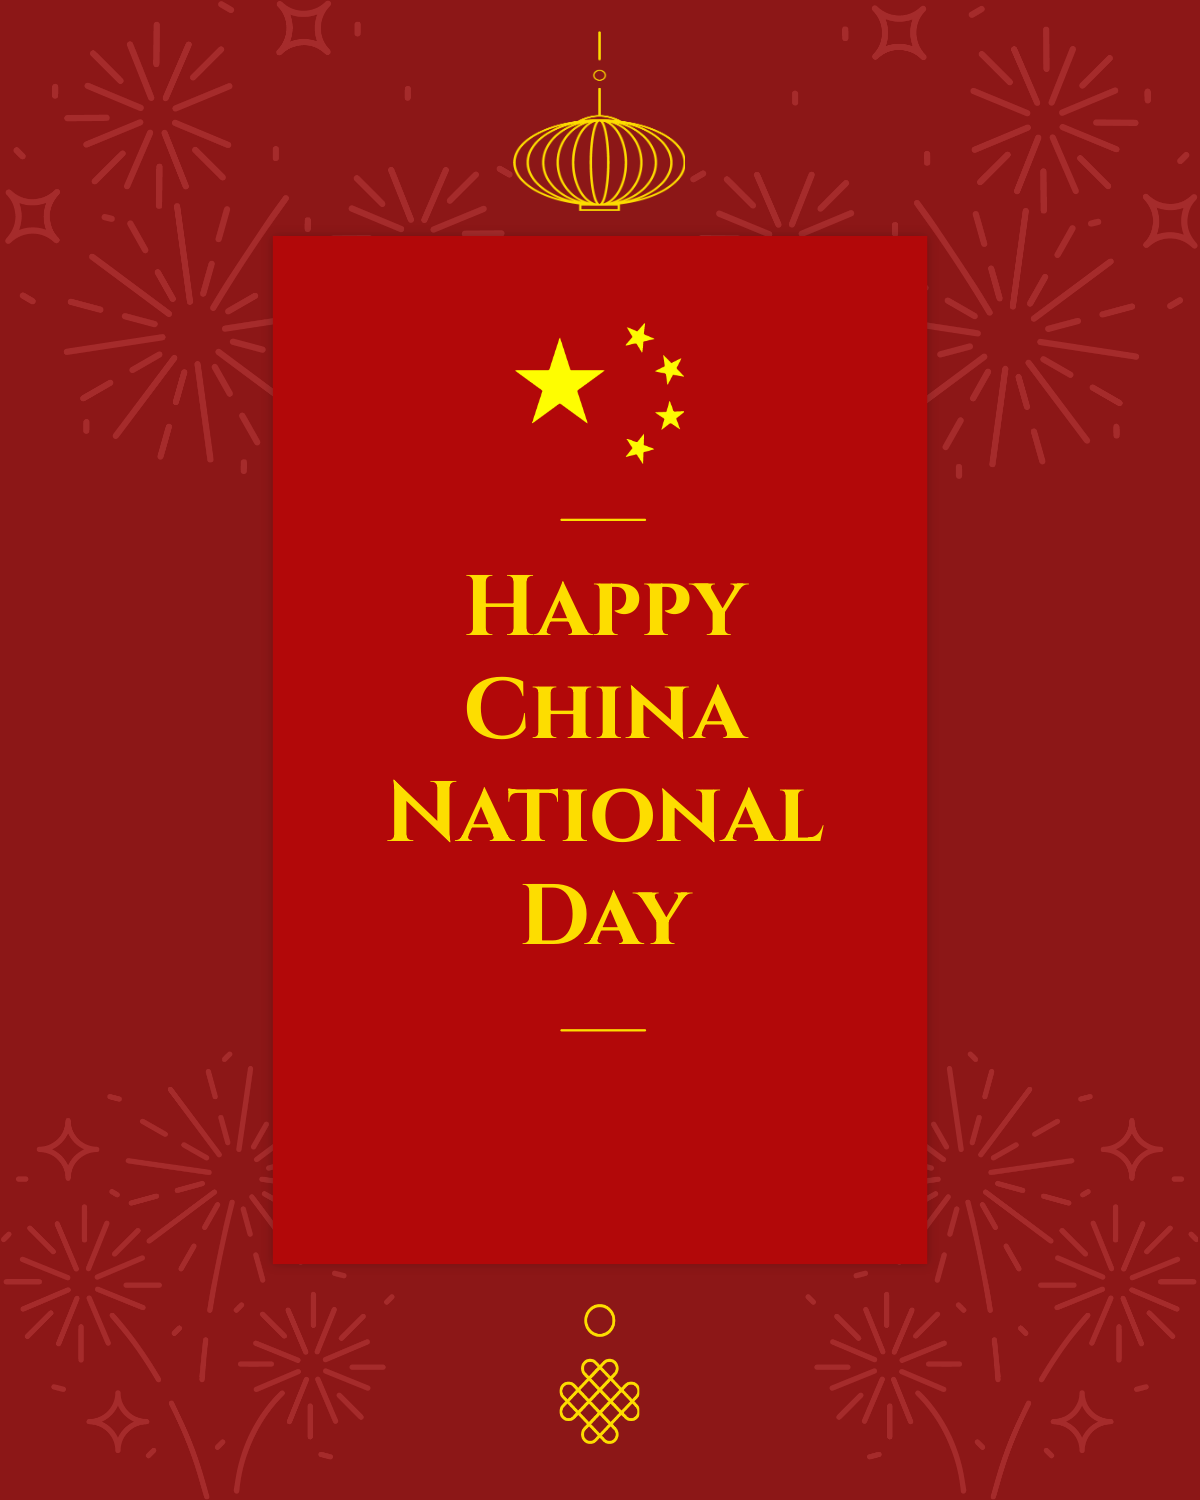 China National Day Facebook Post Template